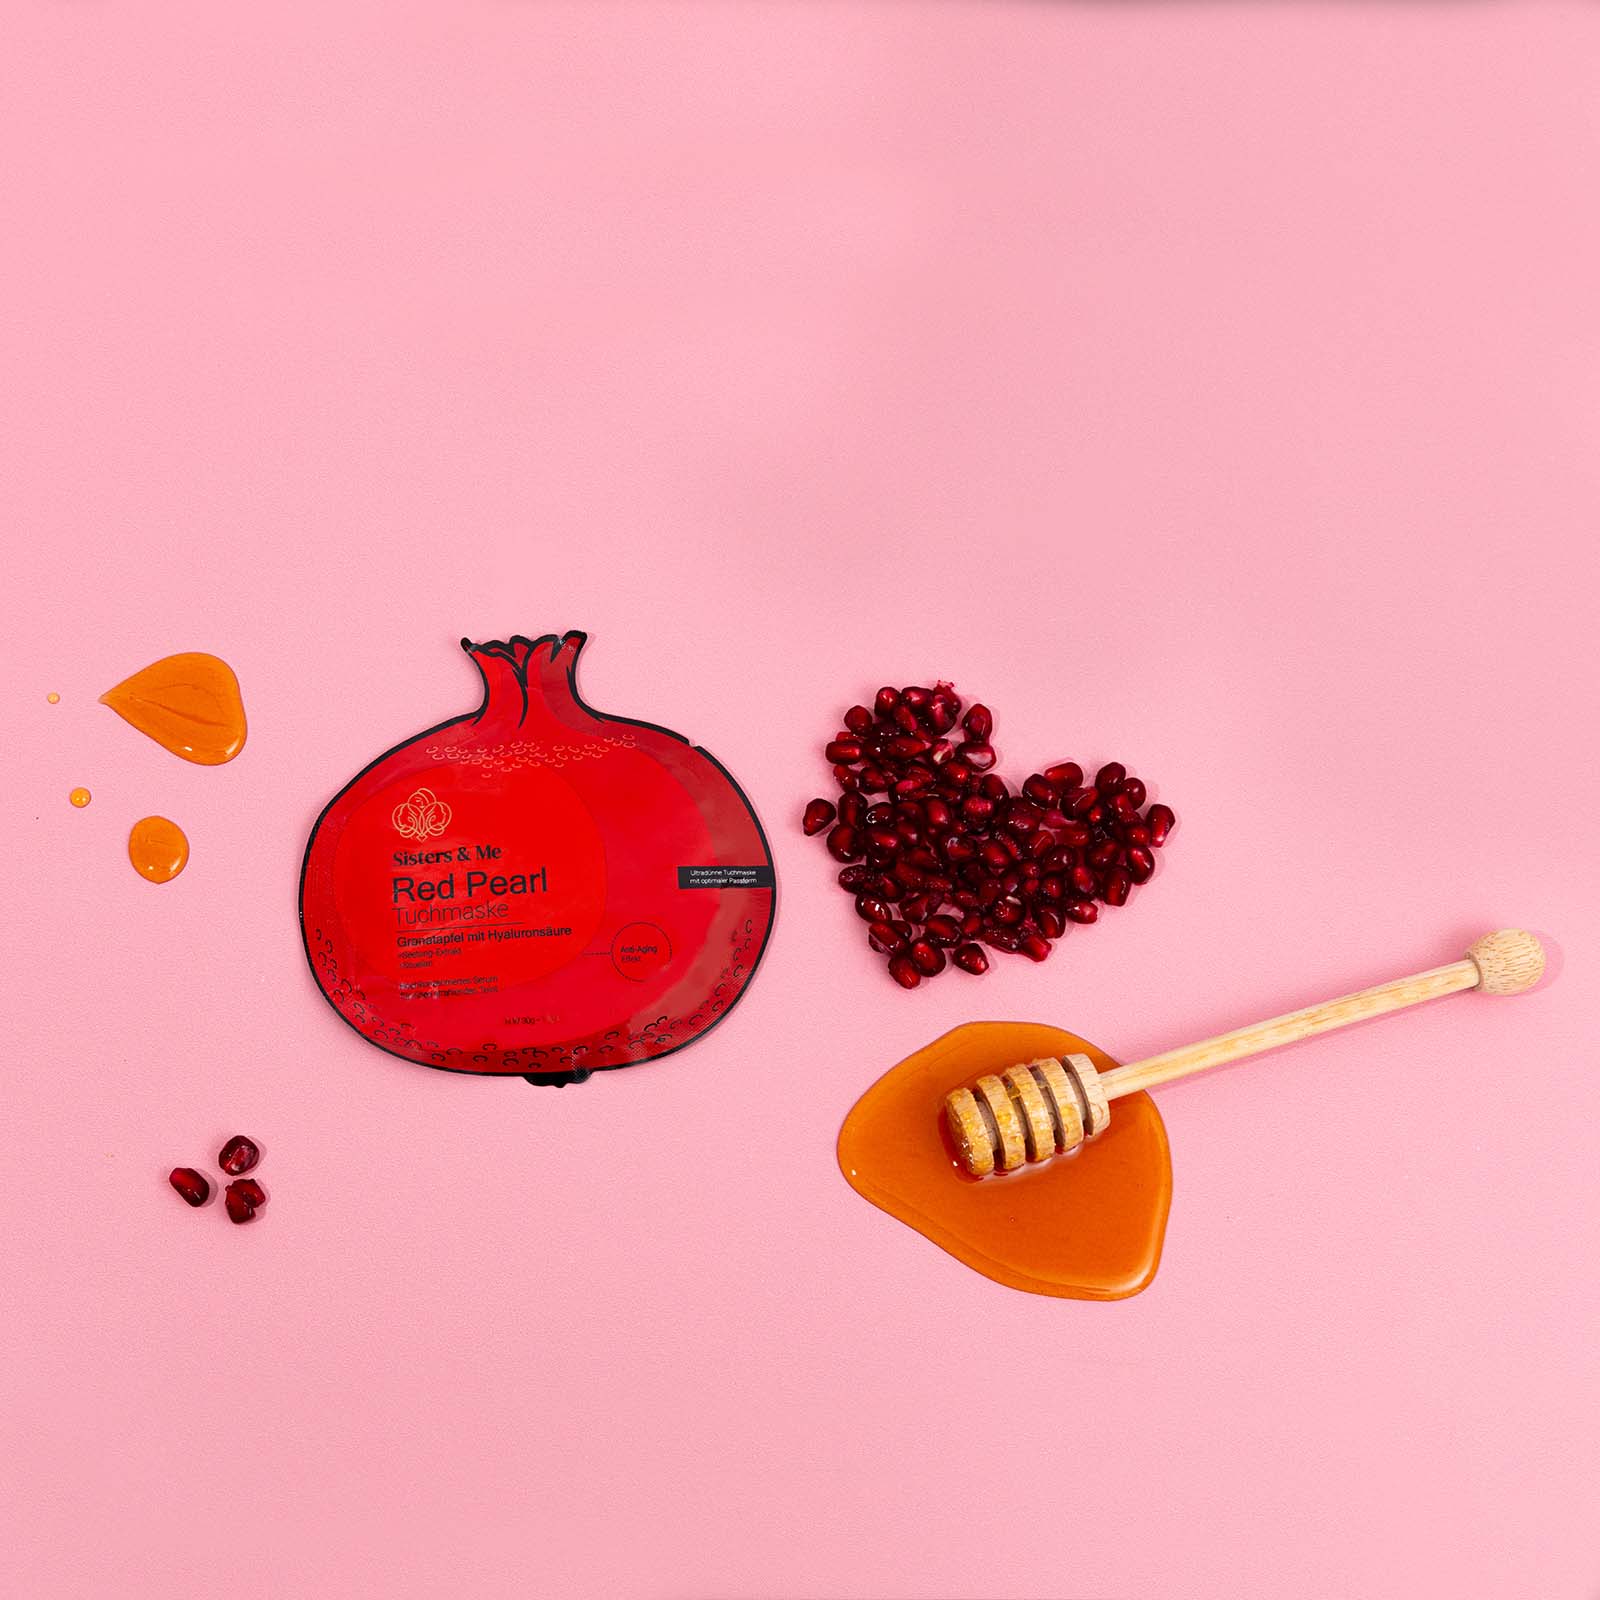 cute pink product photos with ingredient pomegranate for face mask brand sisters and me. Styled product stills by colourpop studio